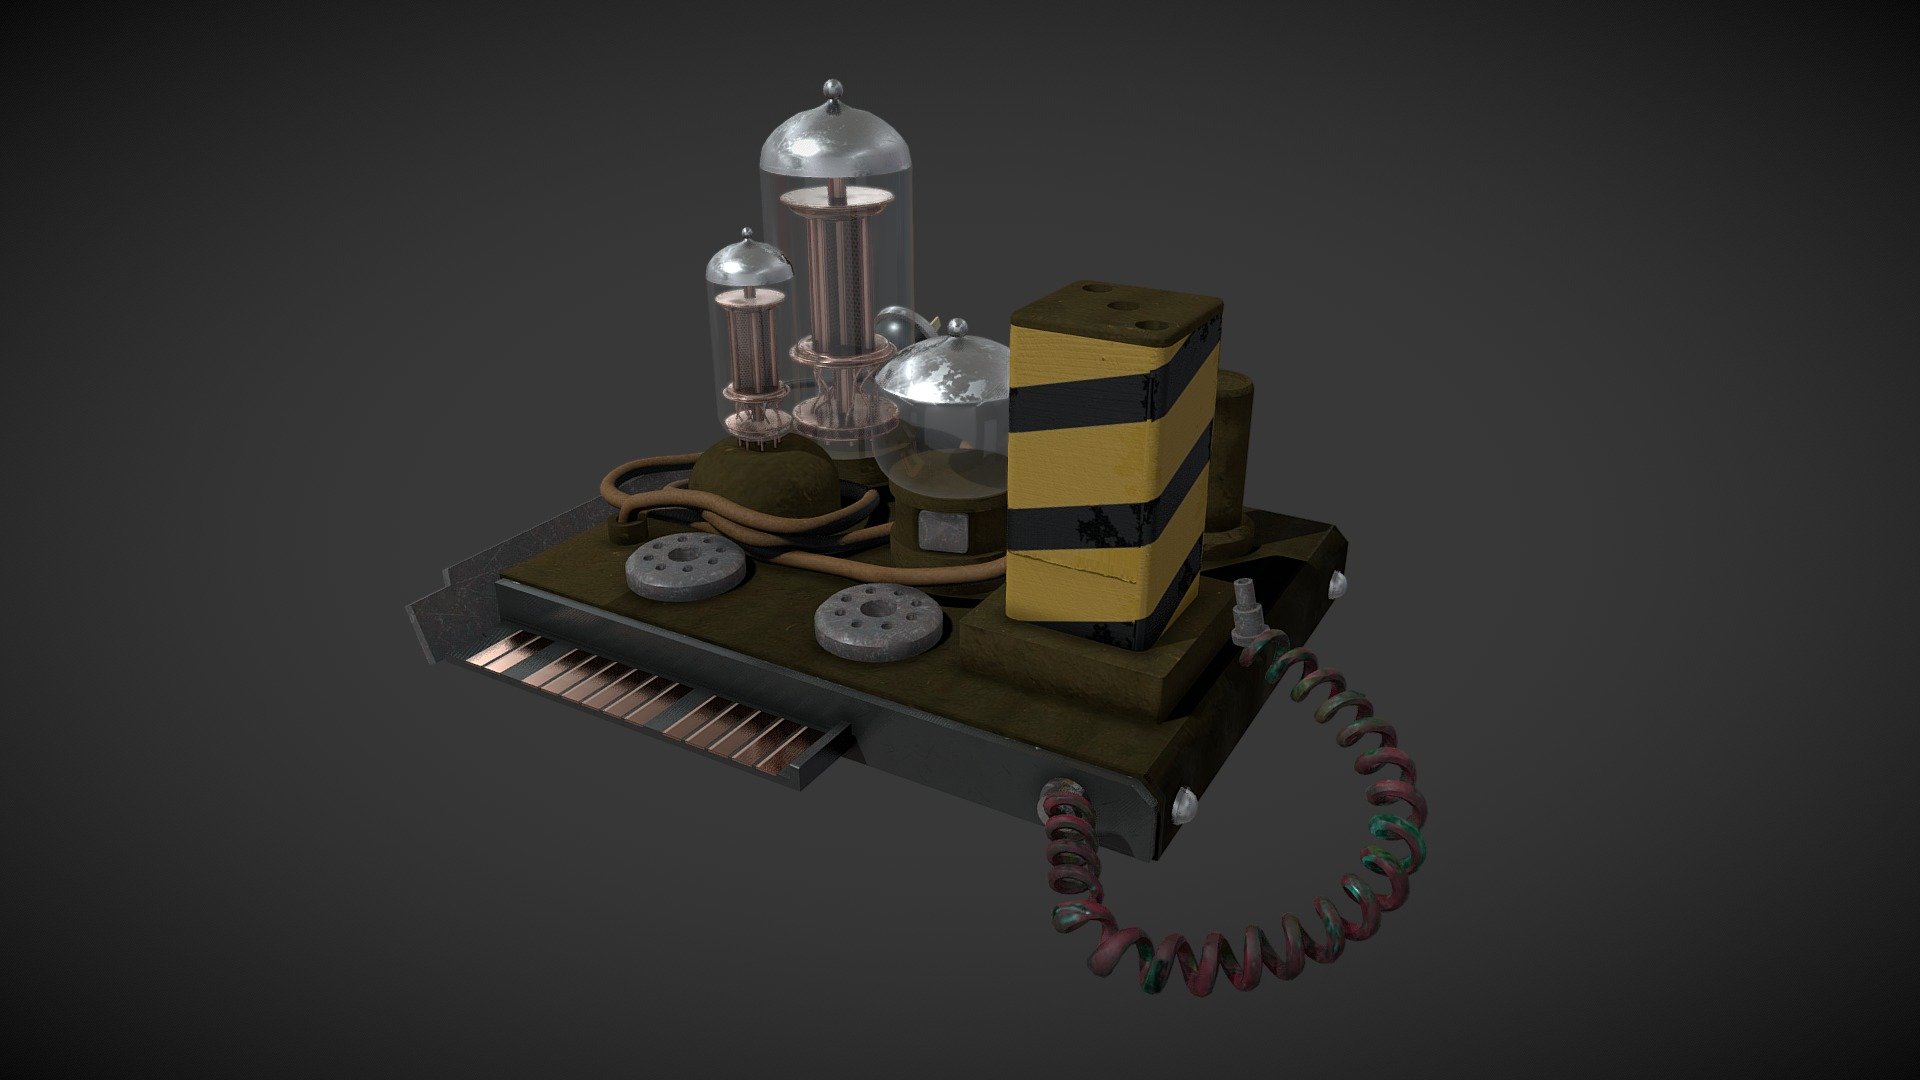 water-chip-fallout-vault-13-3d-model-by-xrendermanx-xrendermannx